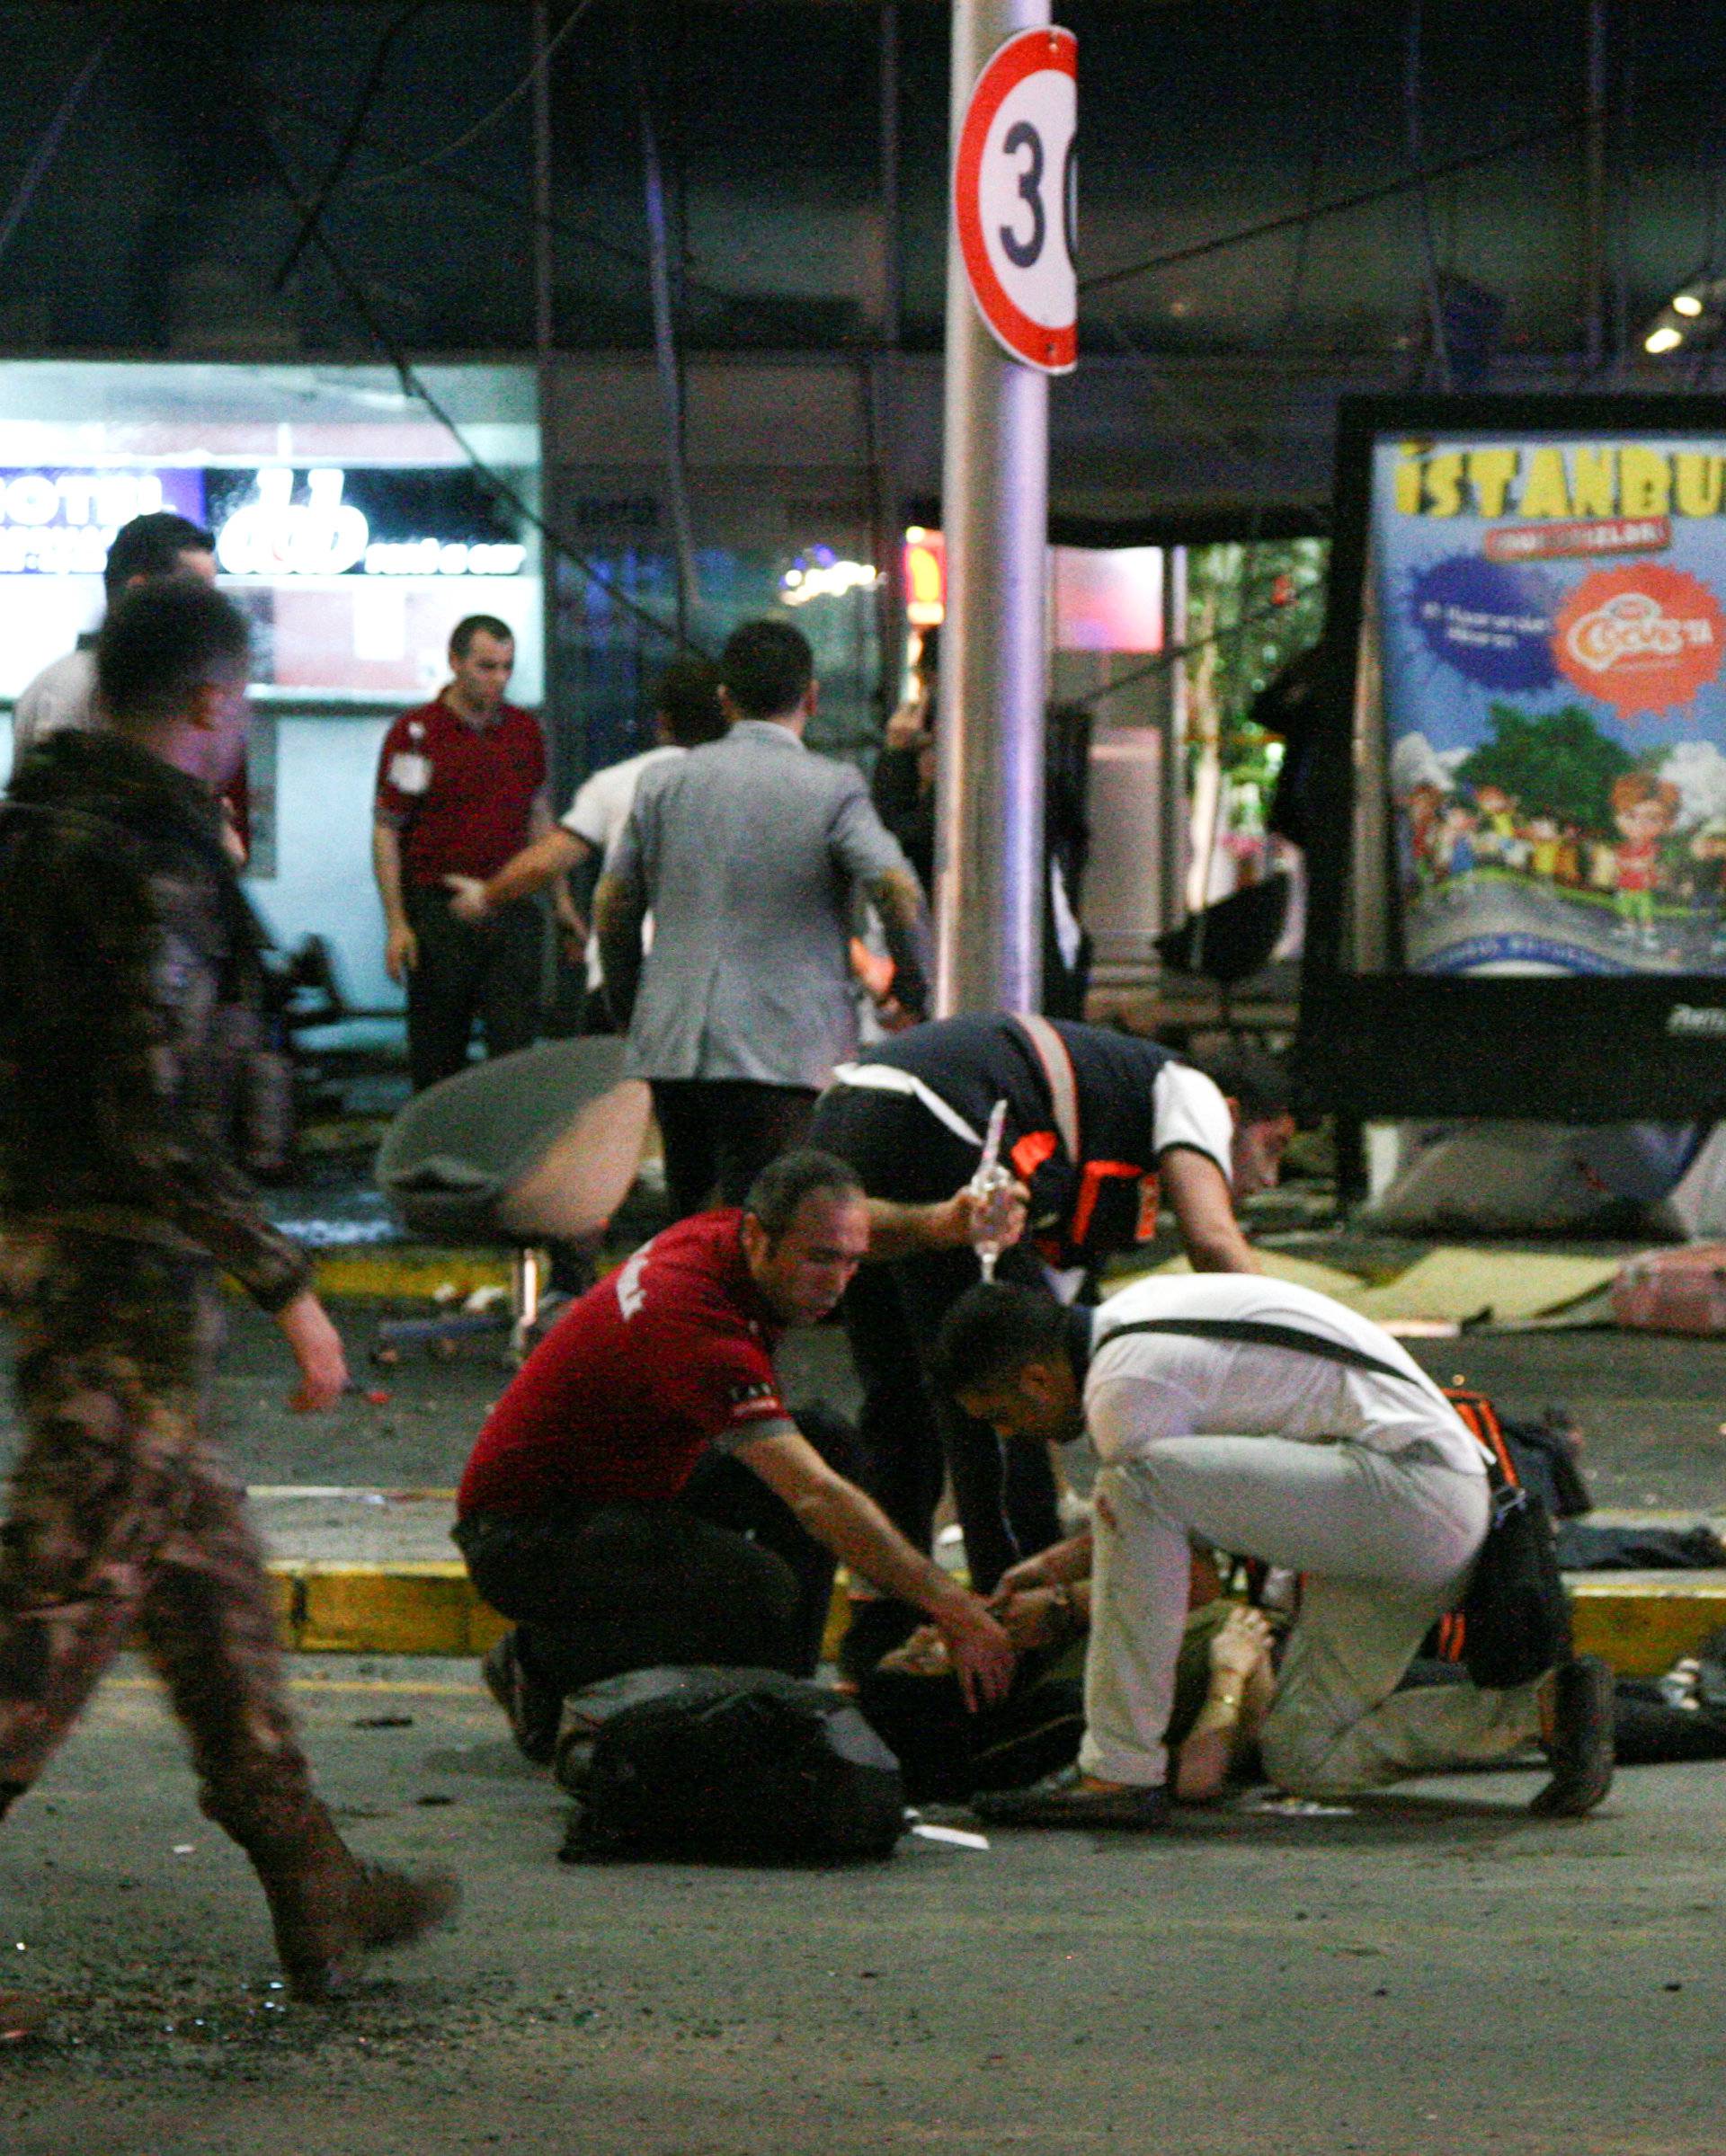 Paramedics attend to casualties injured outside Turkey's largest airport, Istanbul Ataturk, Turkey, following an attack